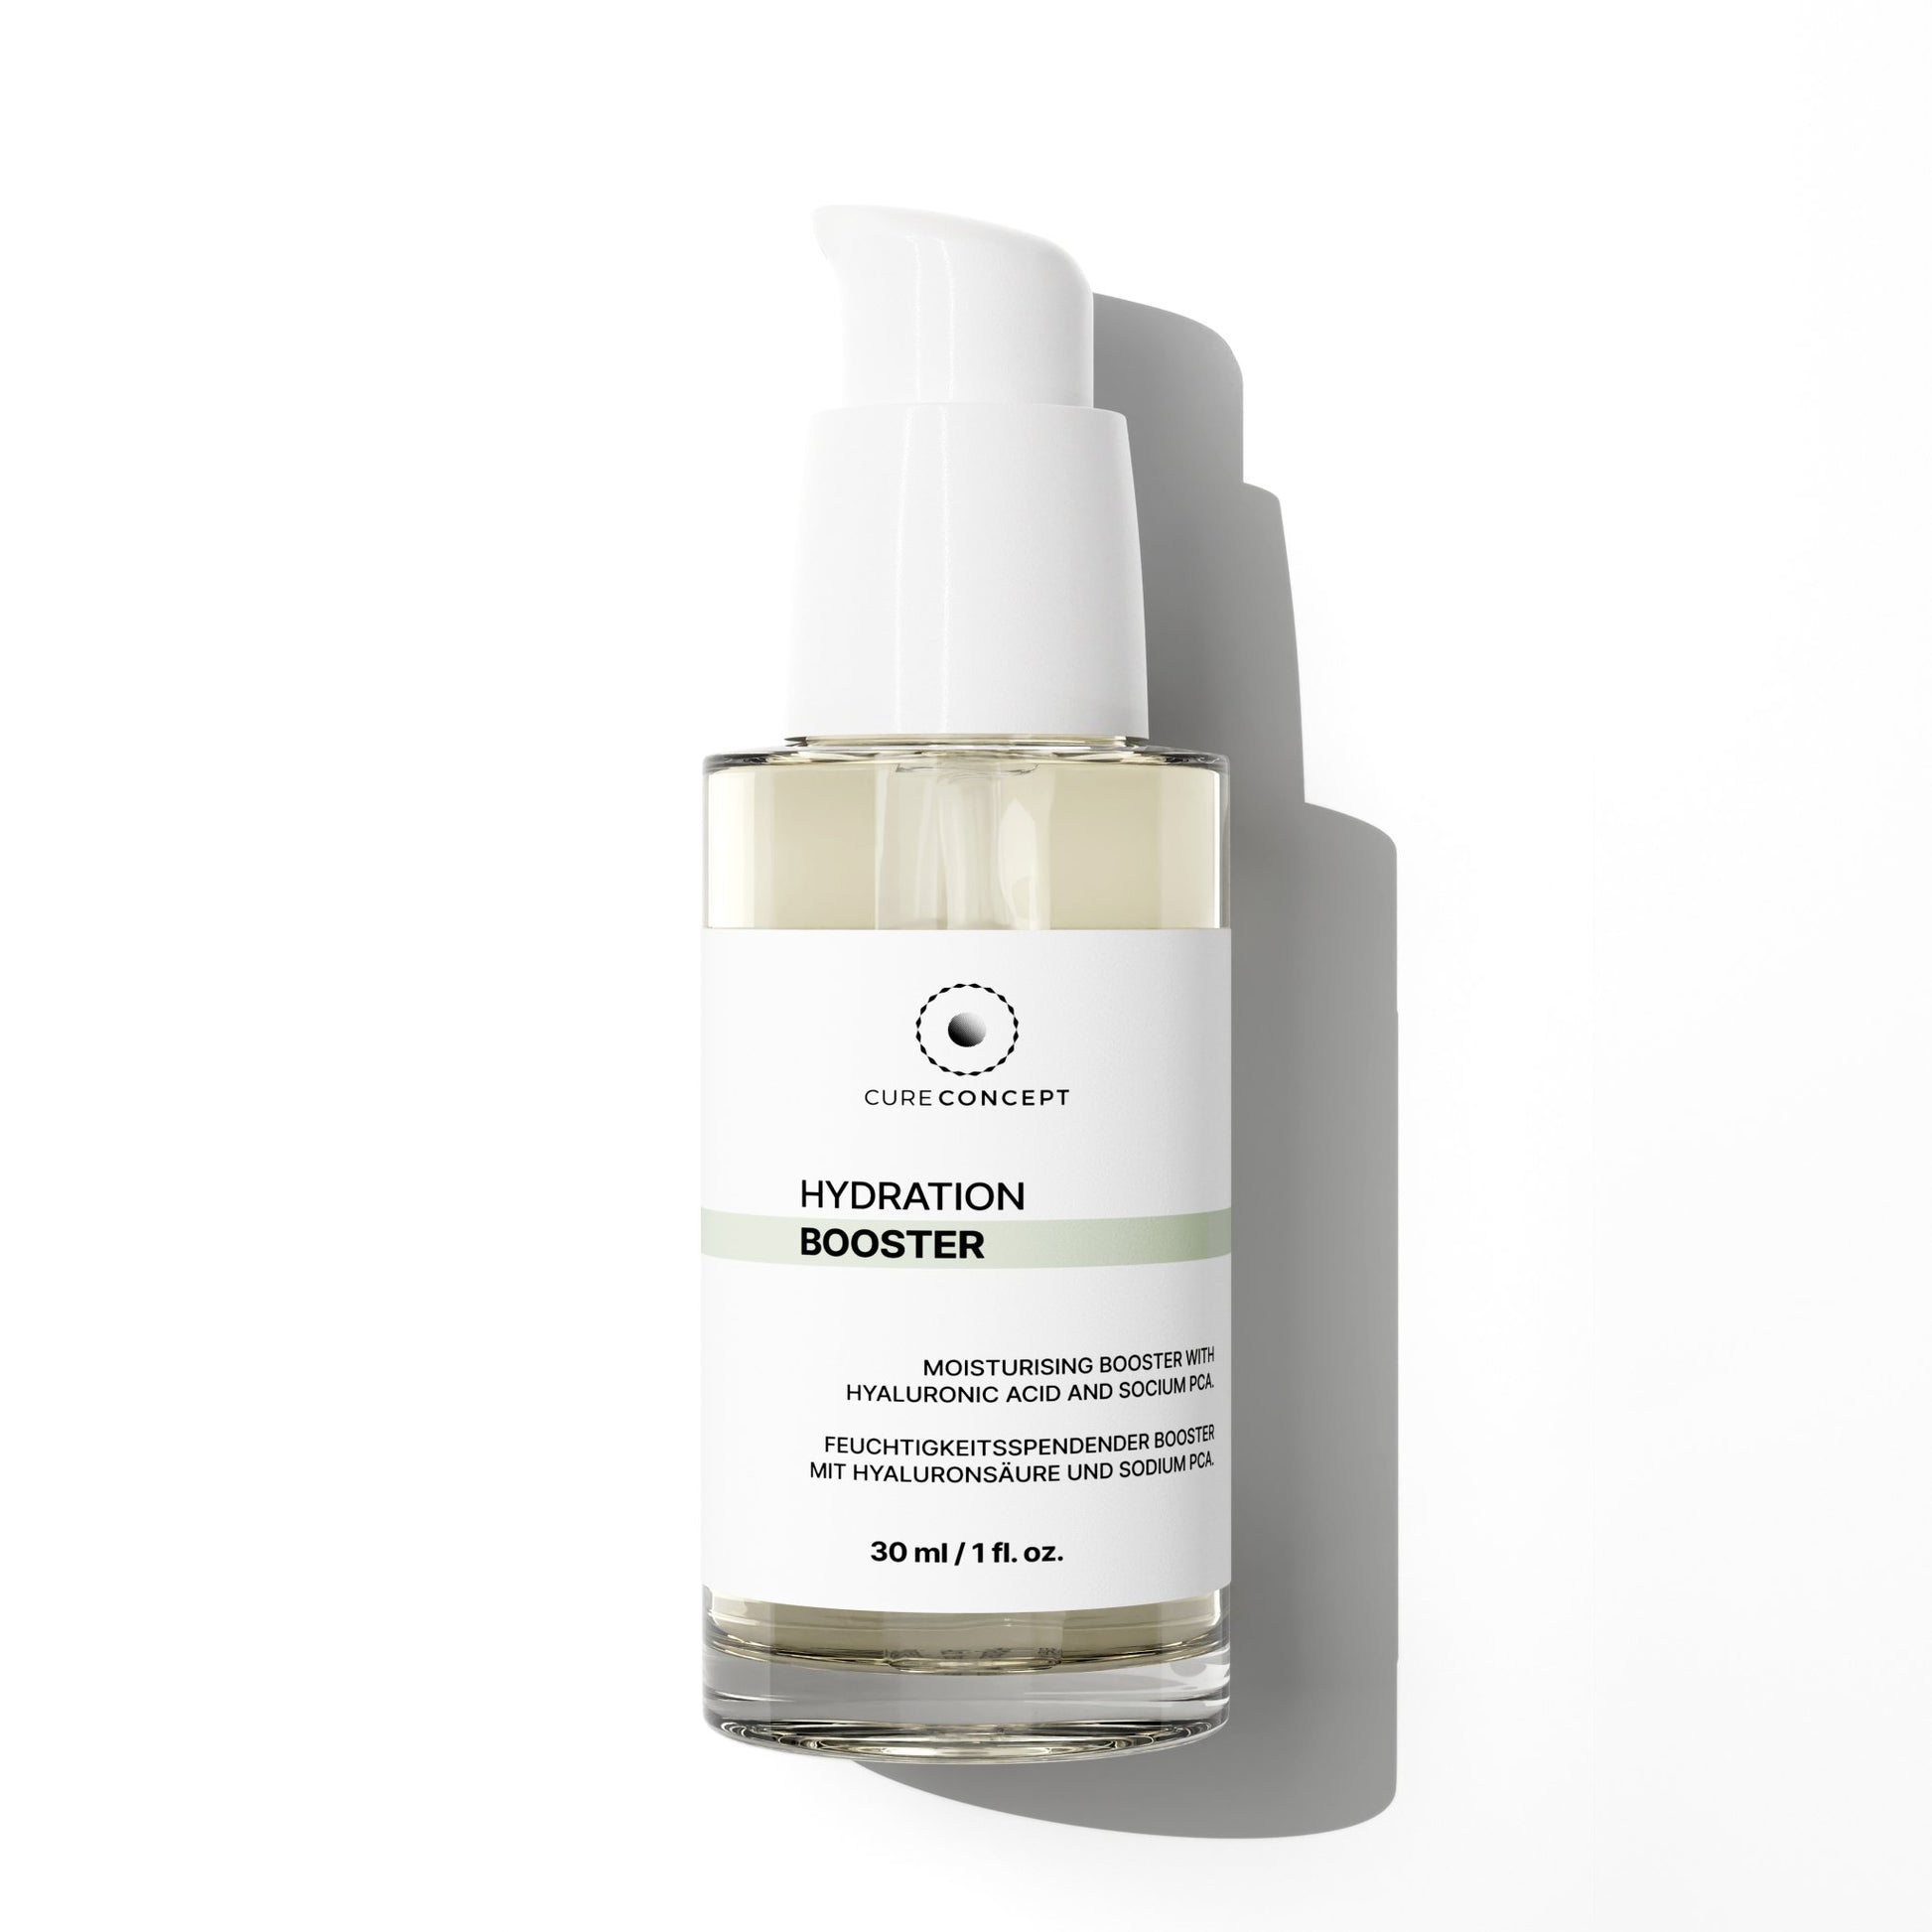 Hydration Booster - Hyaluron Serum - 30ml - Cure Concept